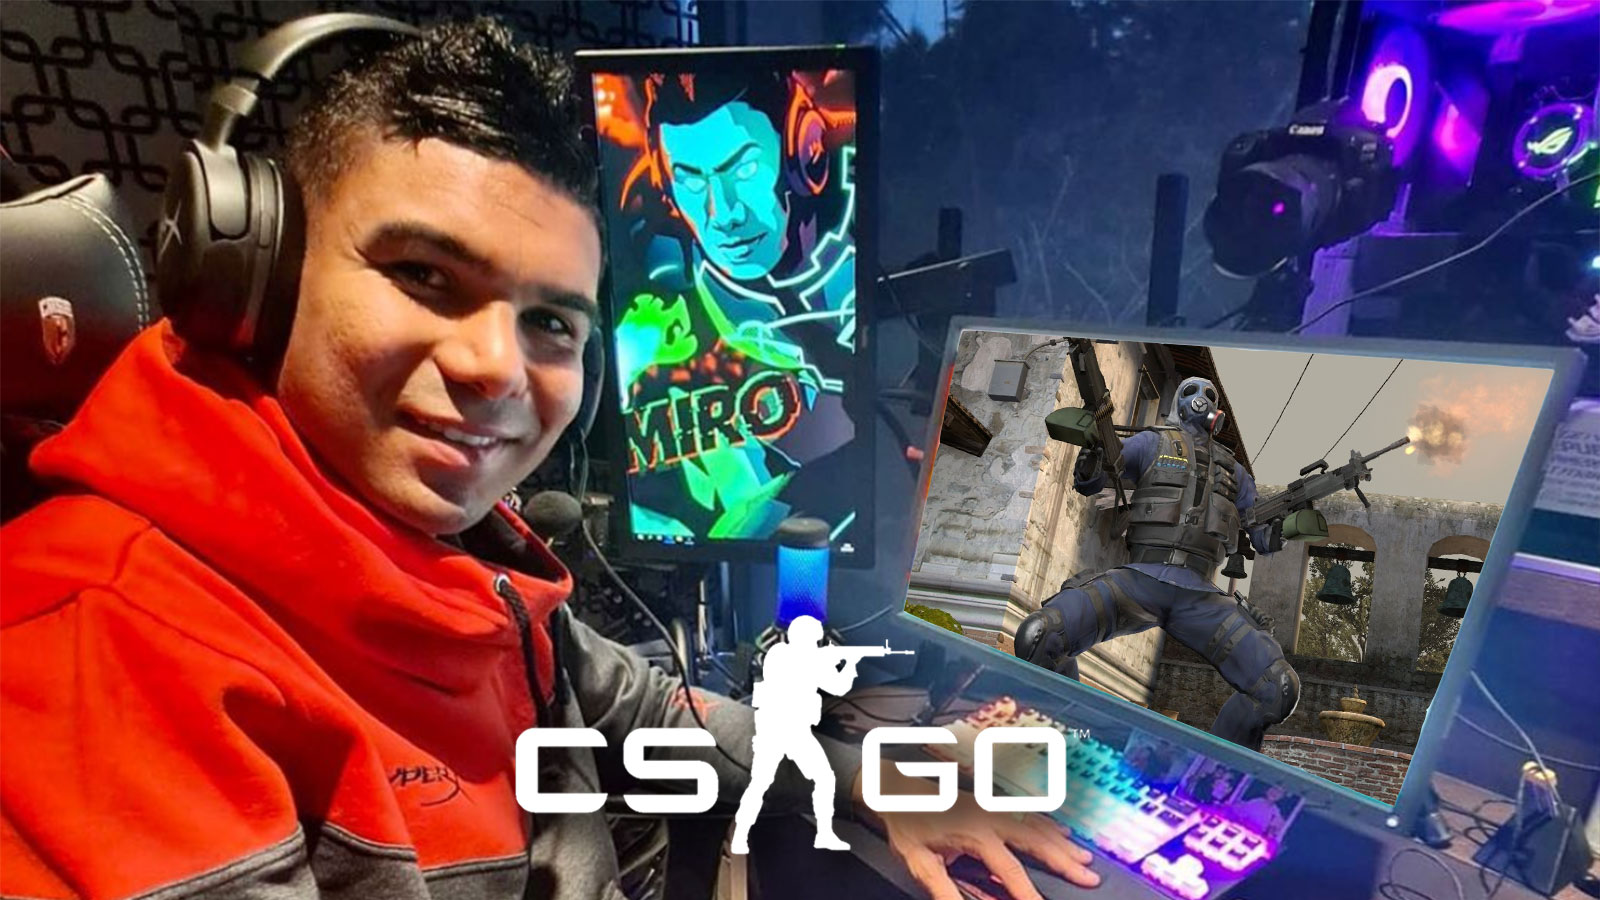 Real Madrids Casemiro explains why CSGO is more nerve-wracking than football